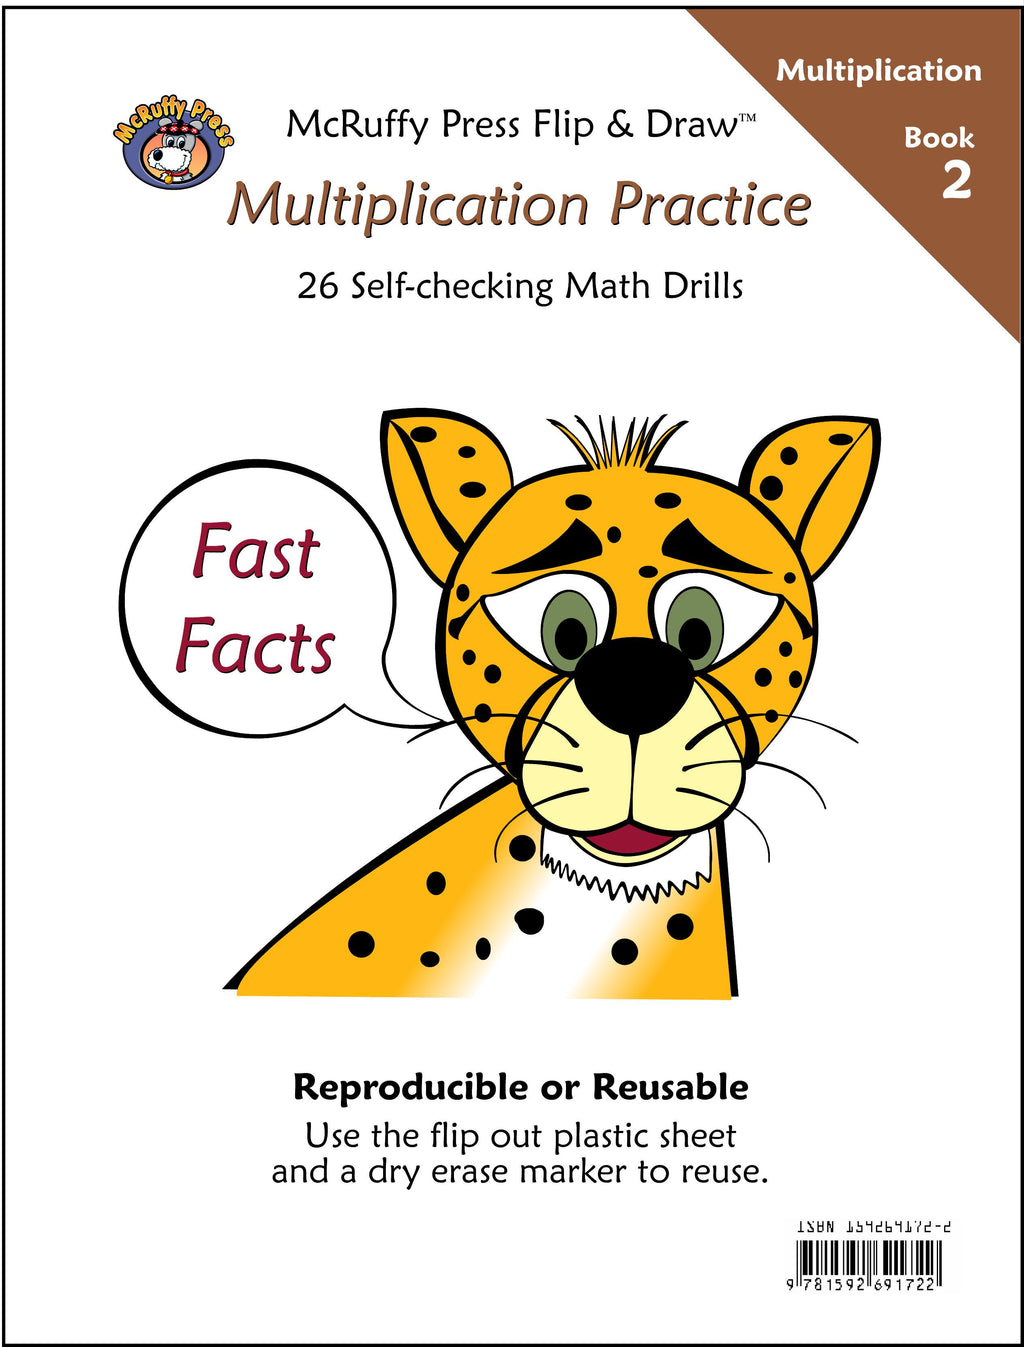 McRuffy Fast Facts Flip and Draw Books - Multiplication Practice (Book 2) - McRuffy Press